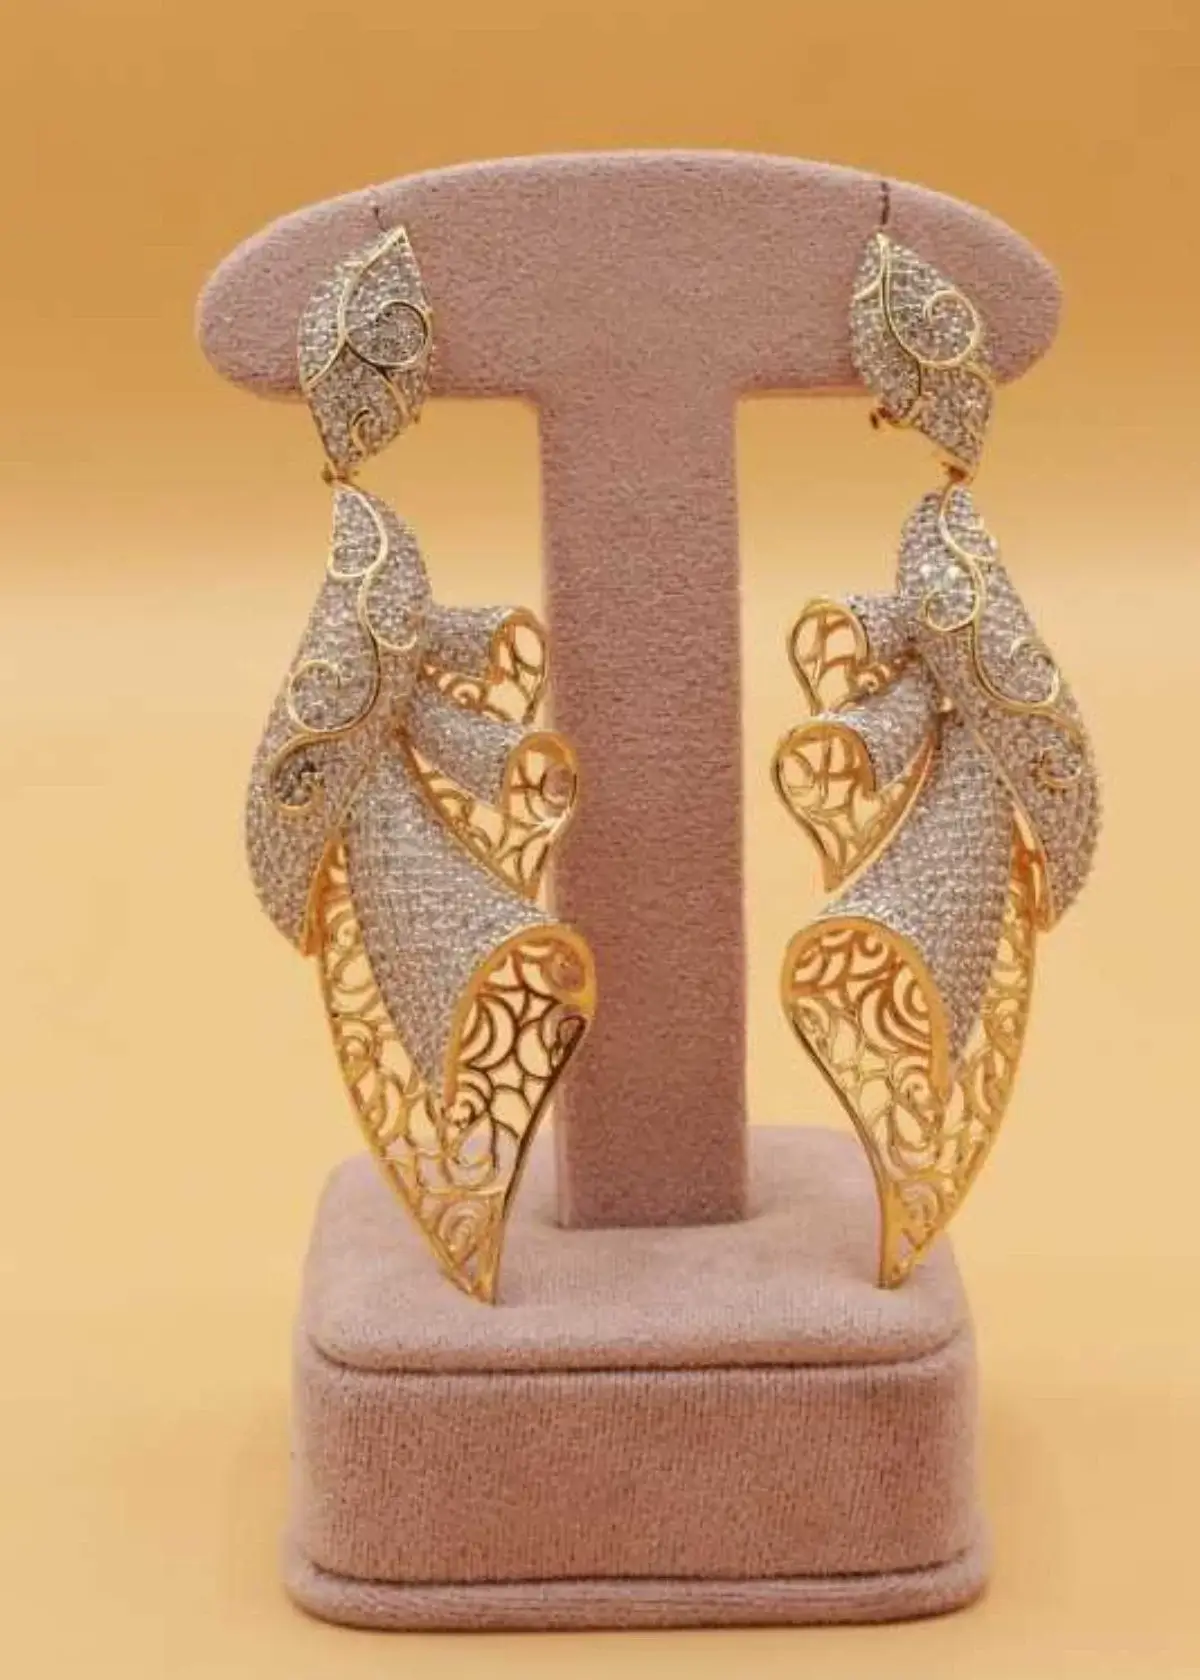 What are Honeycomb Earrings?